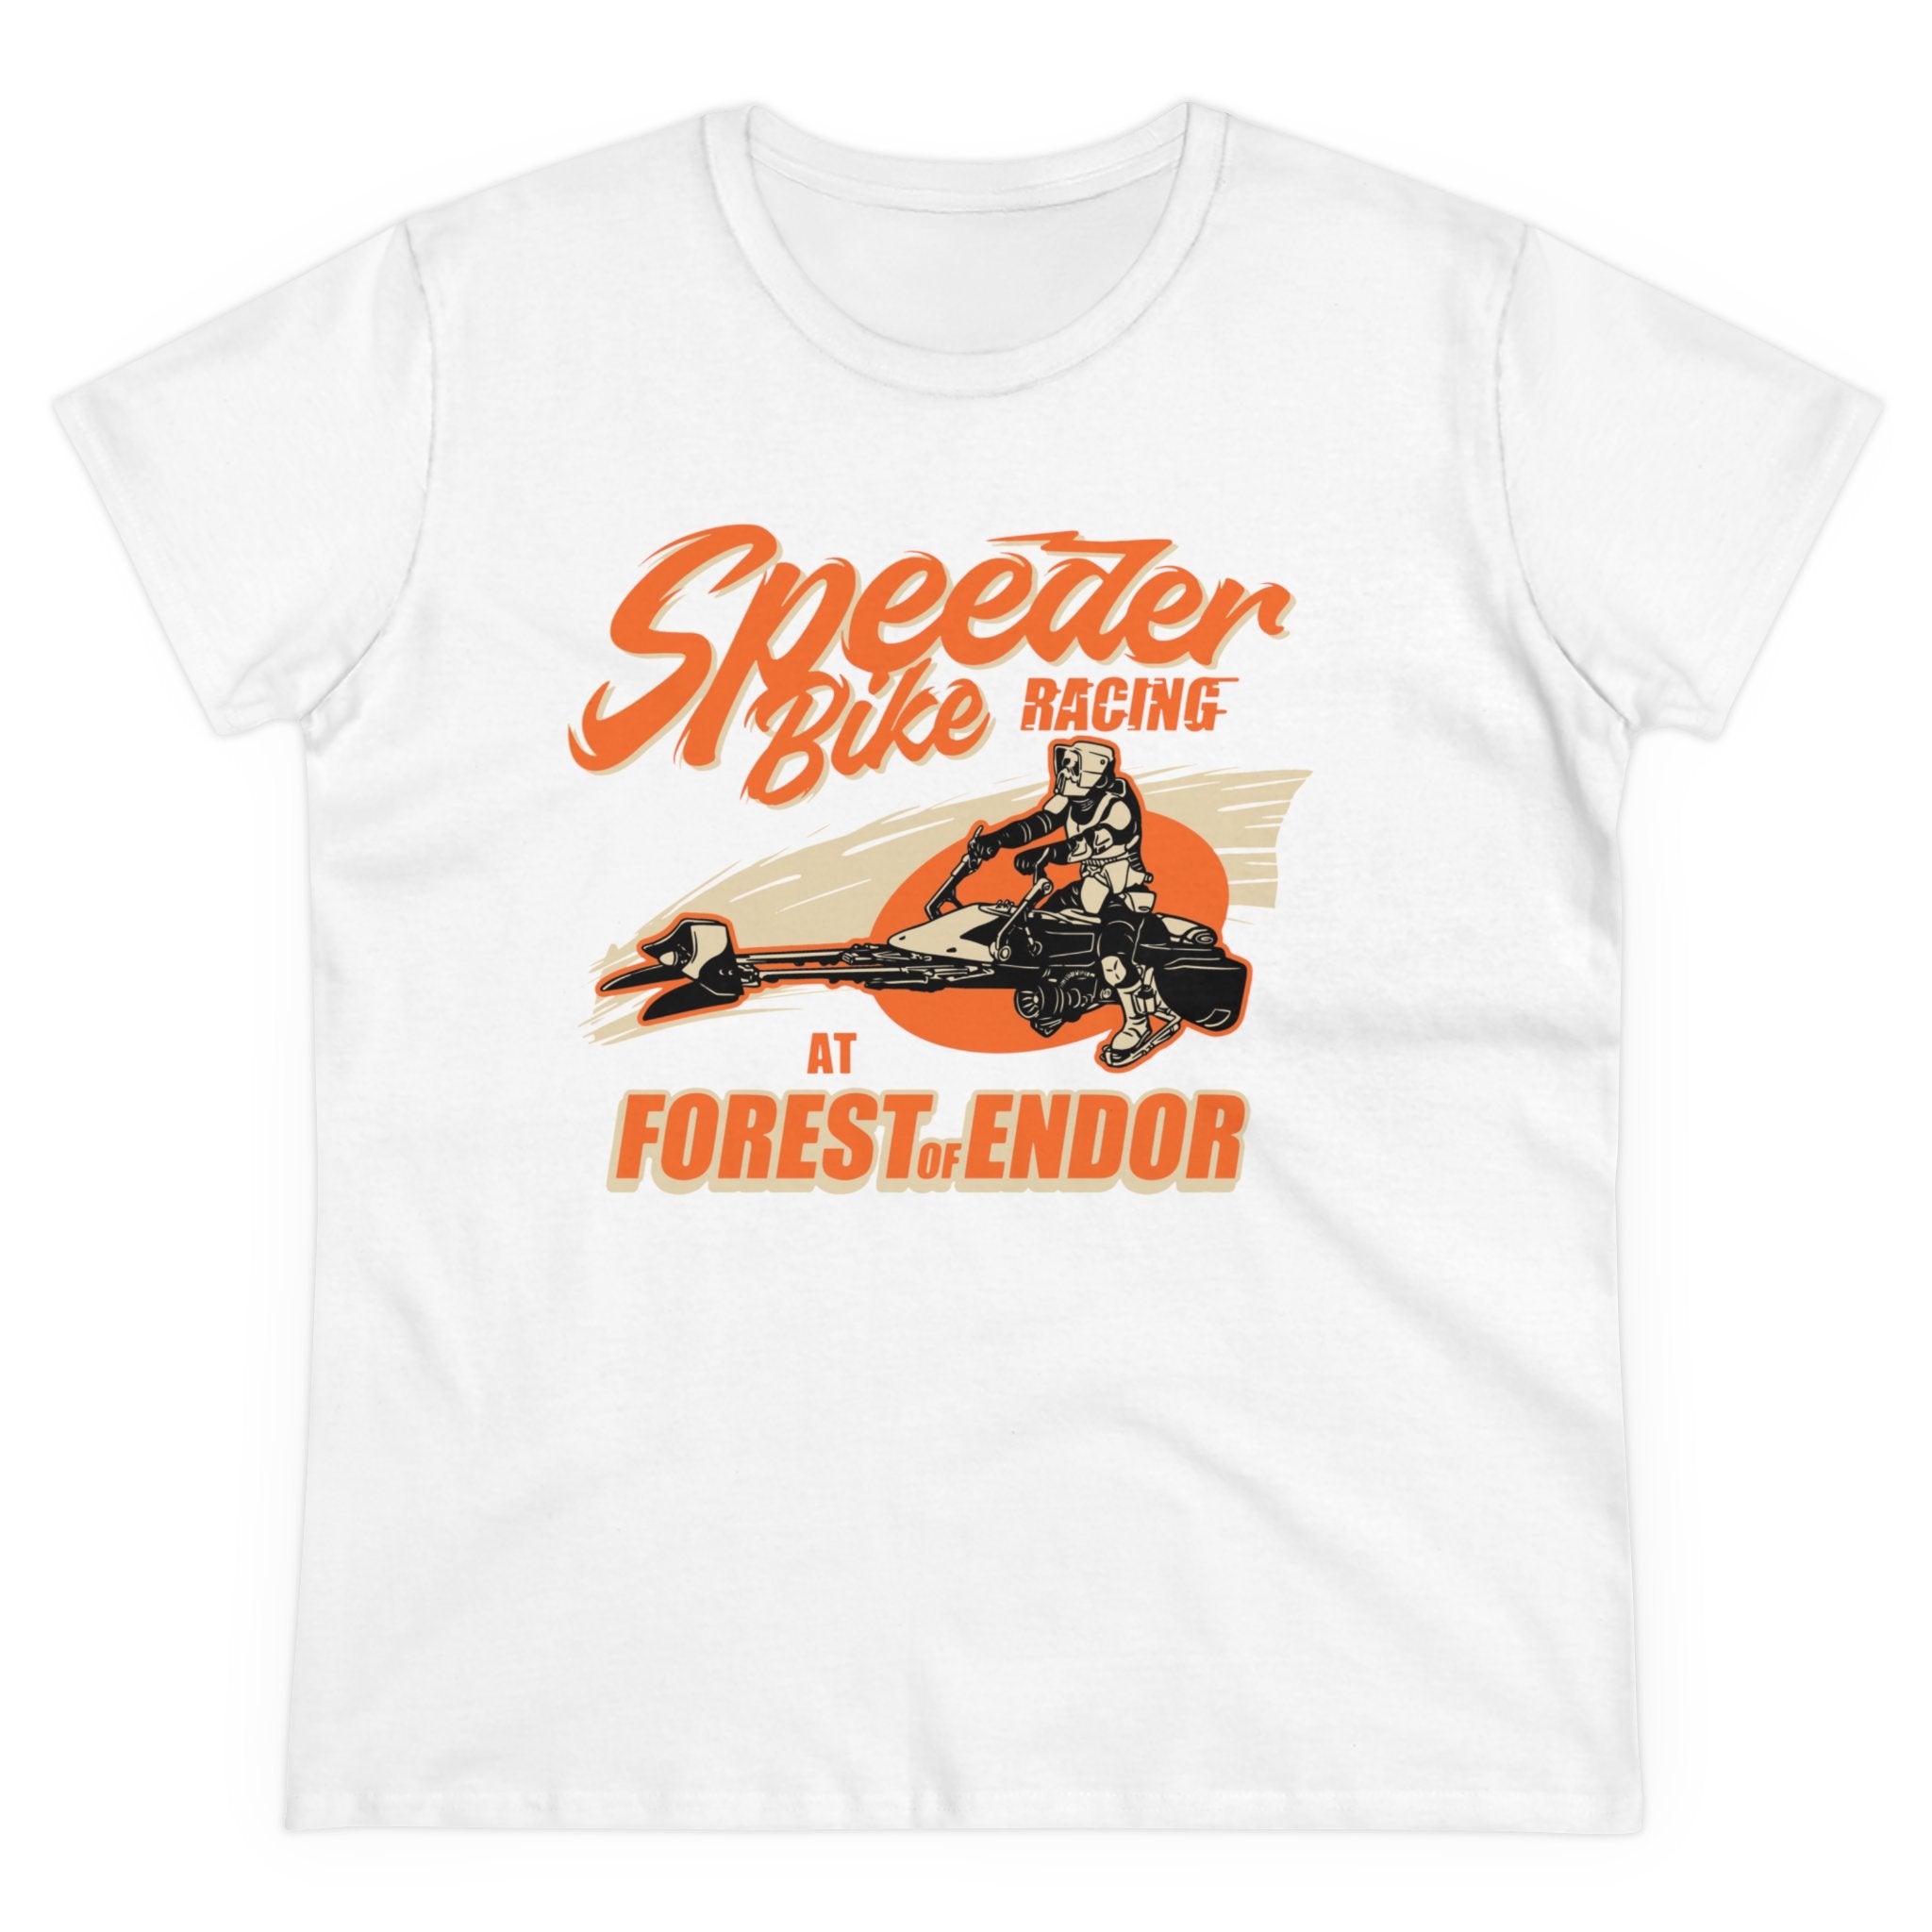 Speeder Bike Racing - Women's Tee featuring an orange and black graphic of a person riding a speeder bike. Text reads "Speeder Bike Racing at Forest of Endor.